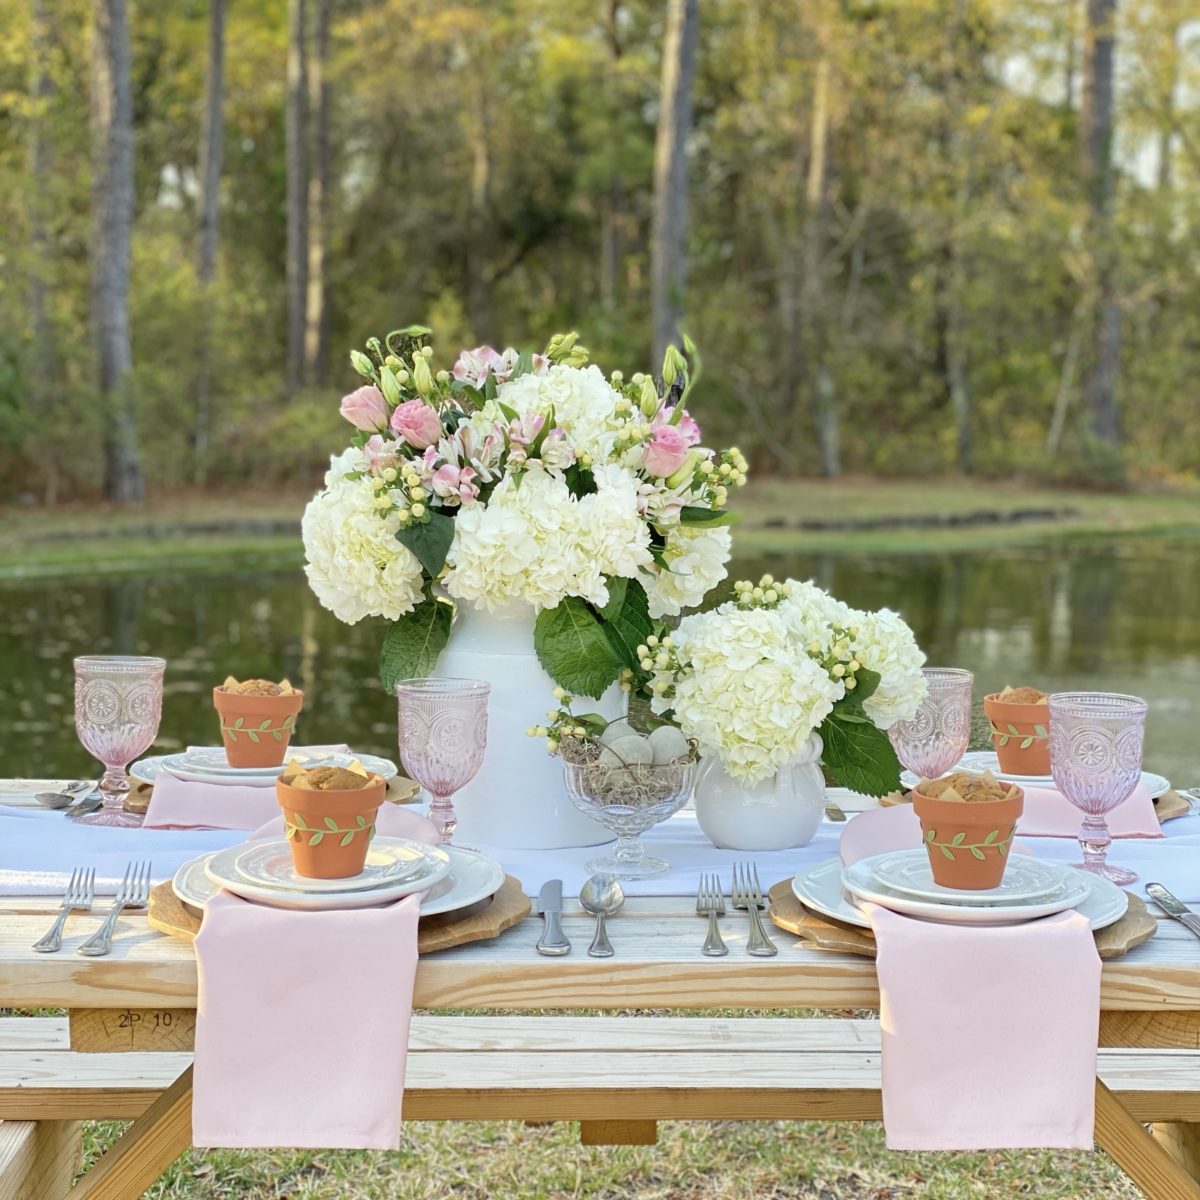 A simple spring table set with white dishes and pink accents by a pond.